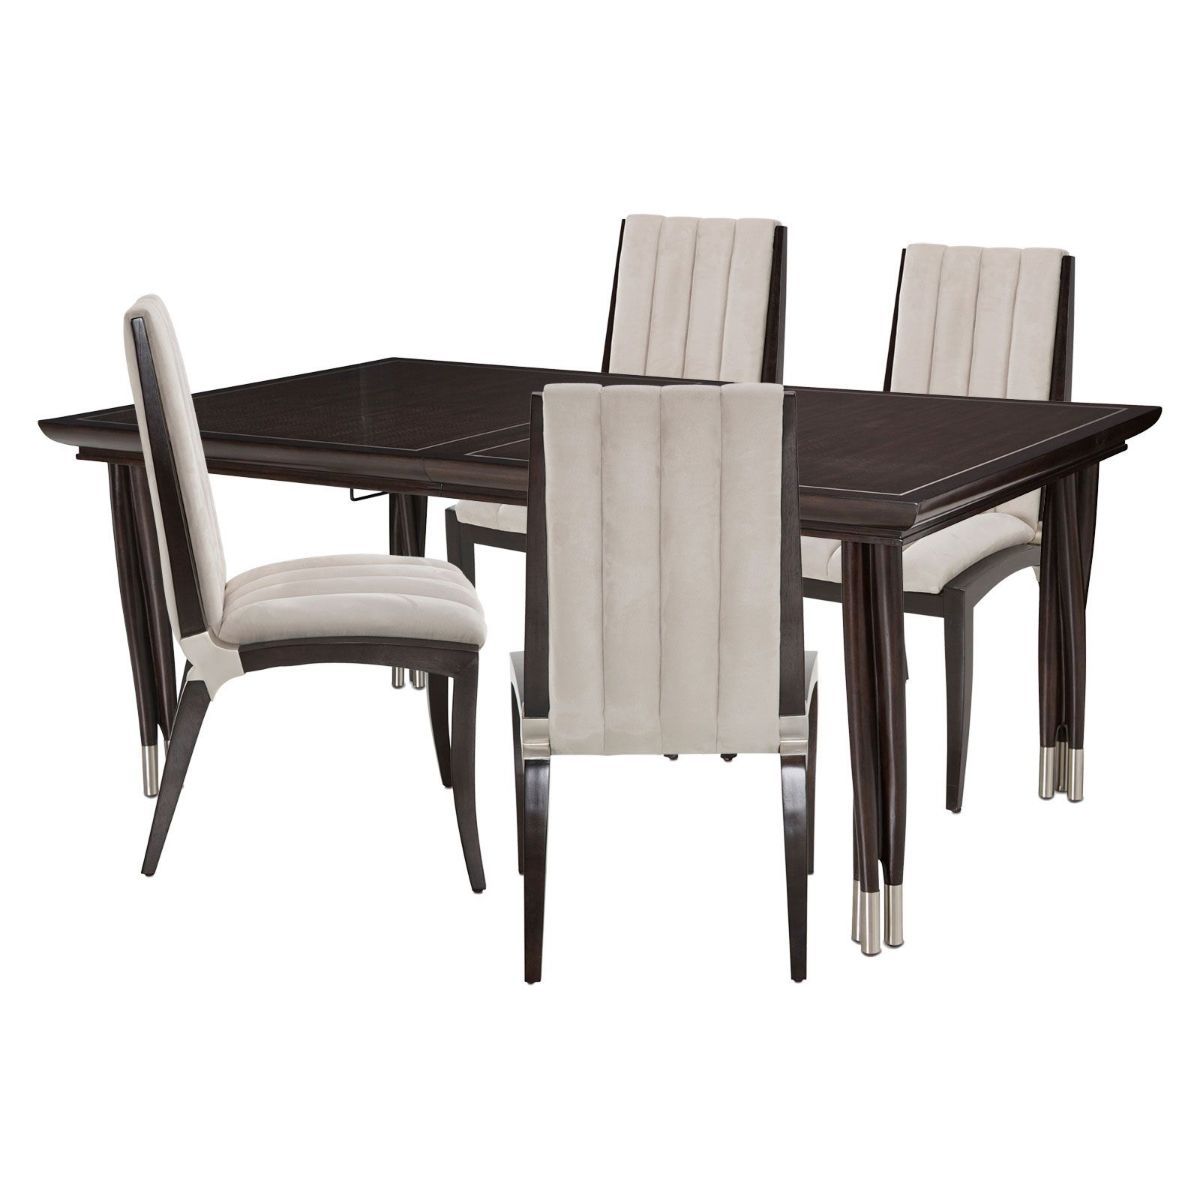 Picture of Paris Chic Dining Table & 4 Chairs